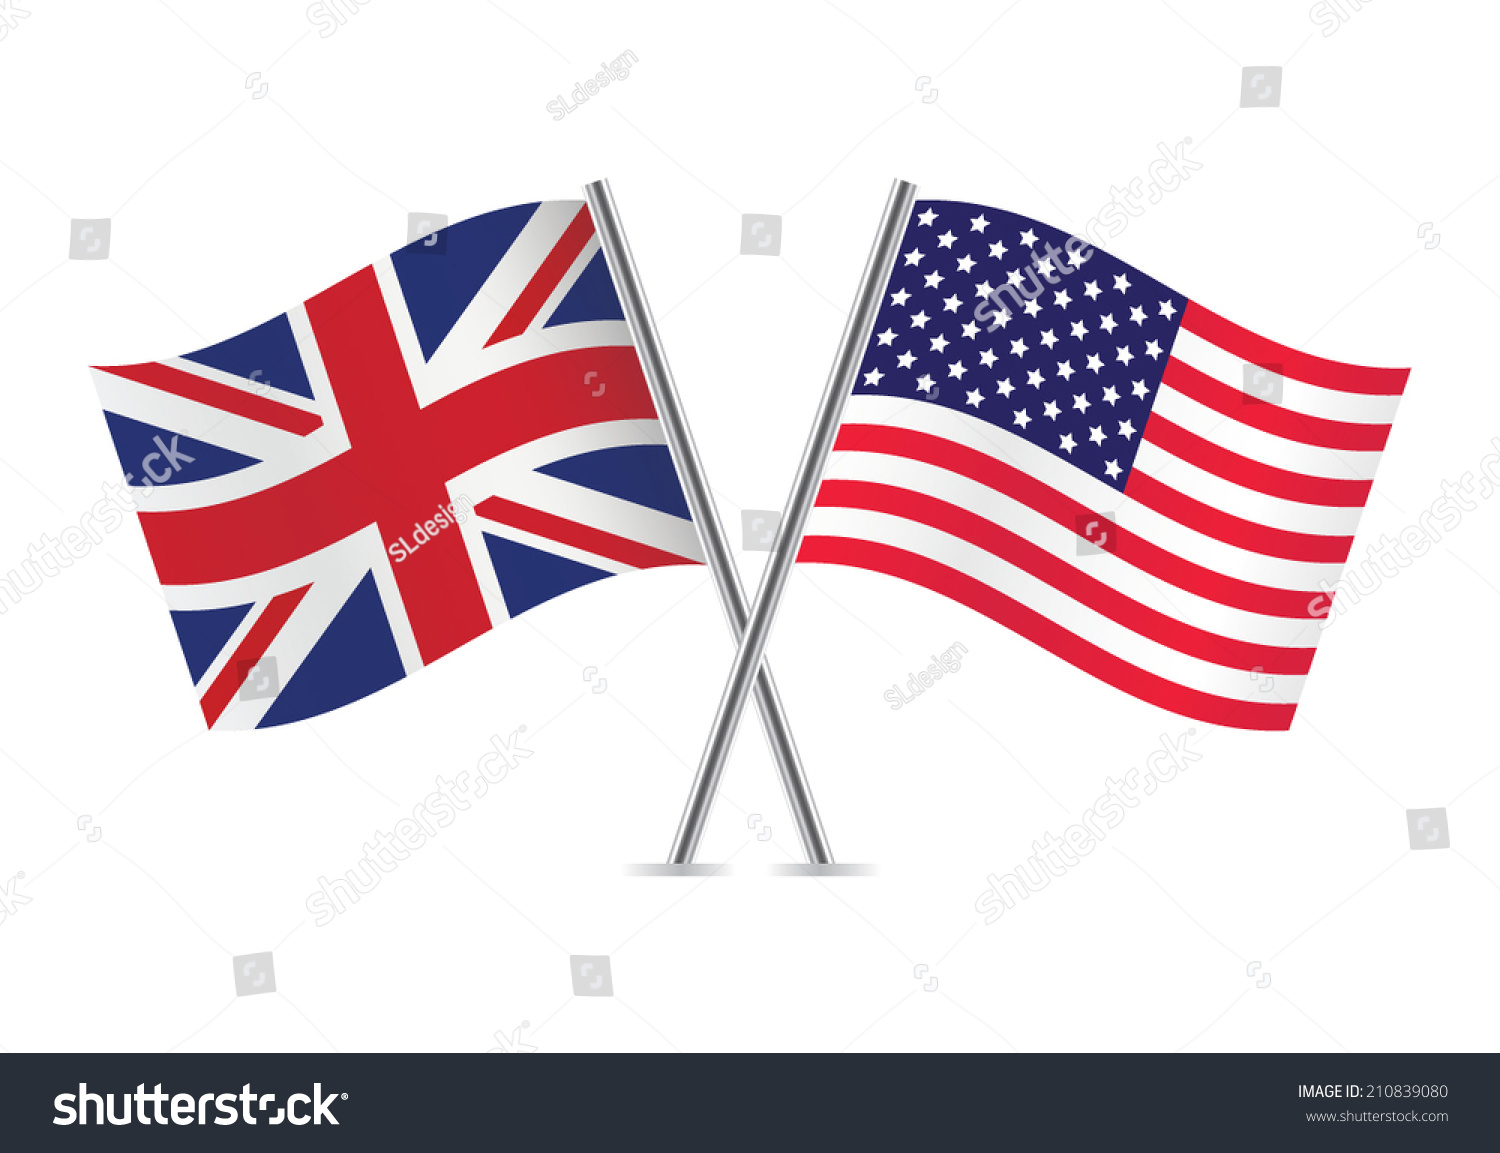 SVG of Great Britain and America flags. British and American flags on white background. Vector icon set. Vector illustration. svg